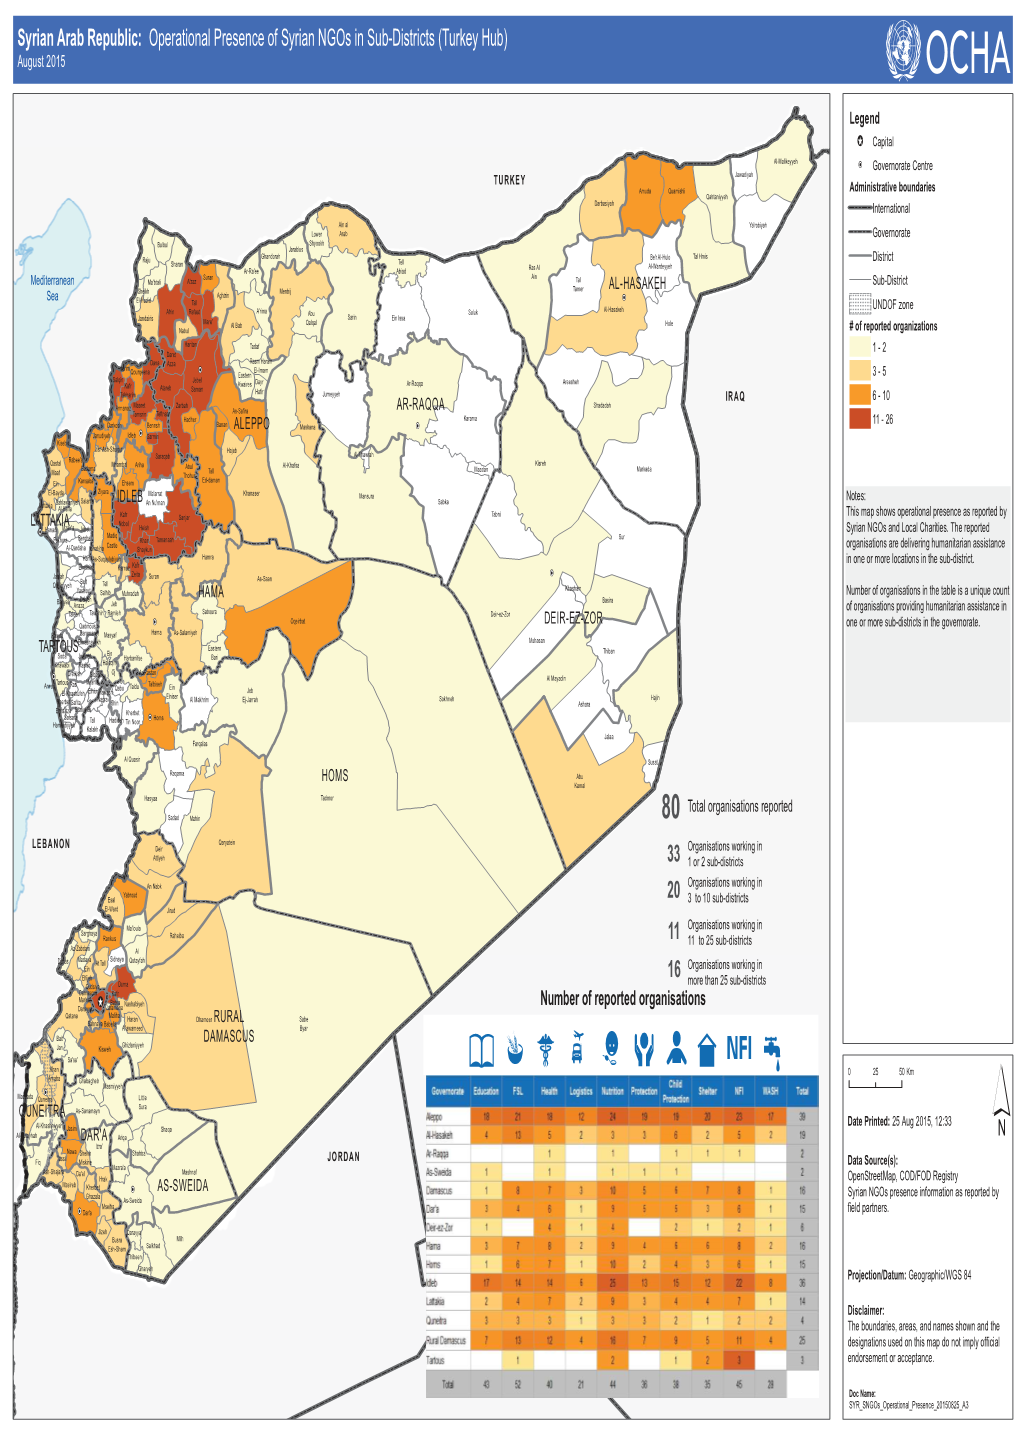 Operational Presence of Syrian Ngos in Sub-Districts (Turkey Hub) August 2015